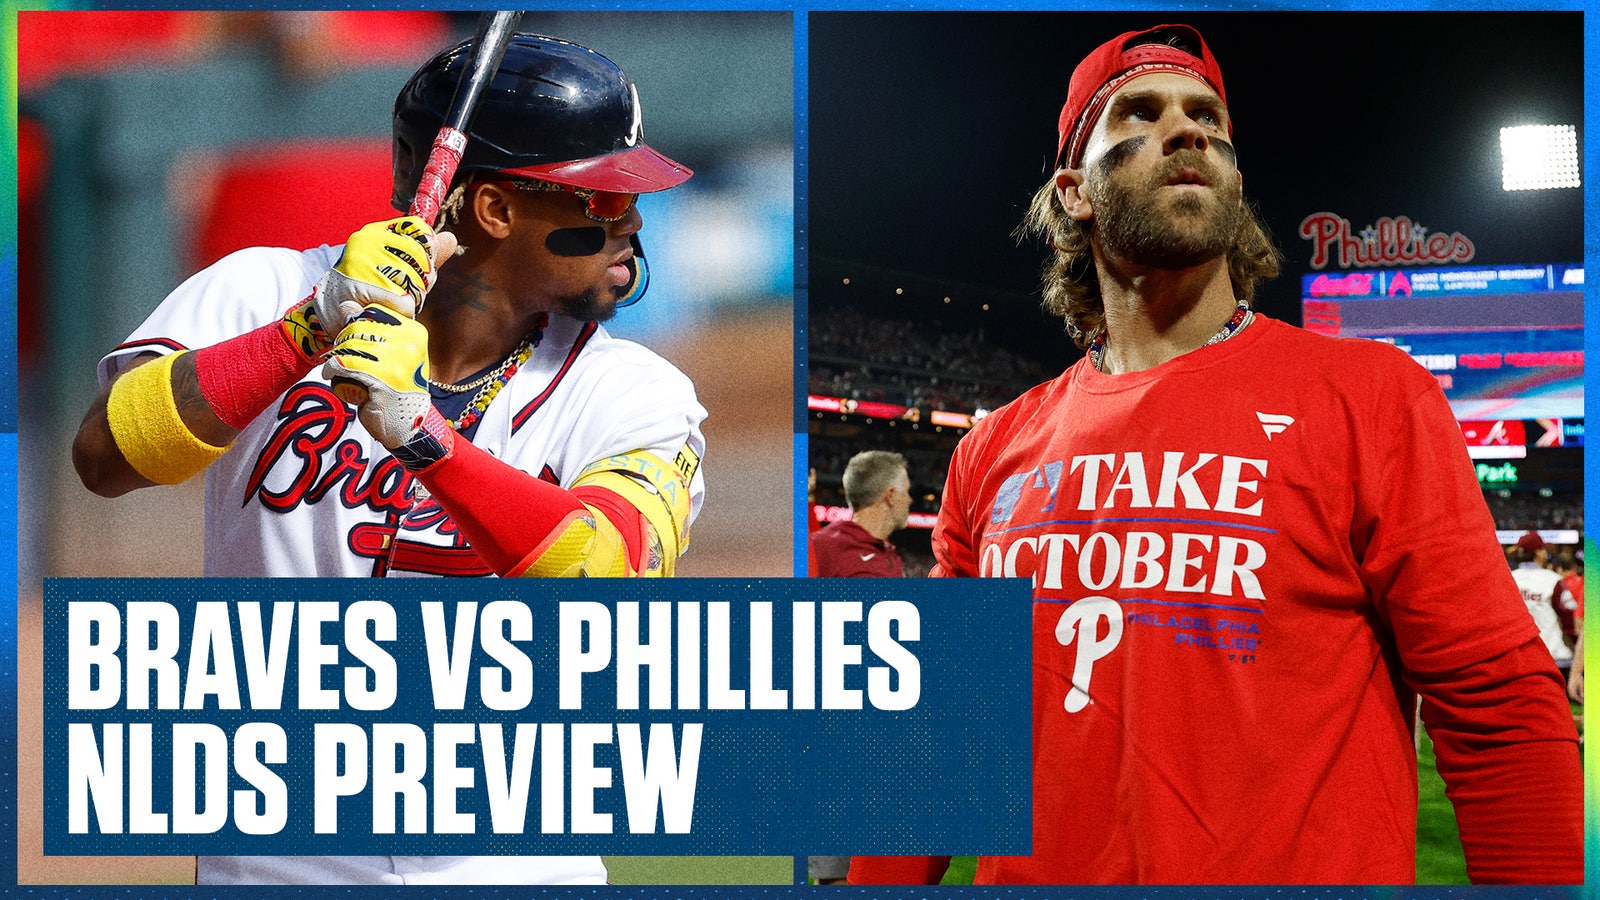 Braves vs. Phillies NLDS Preview: Will history repeat itself?